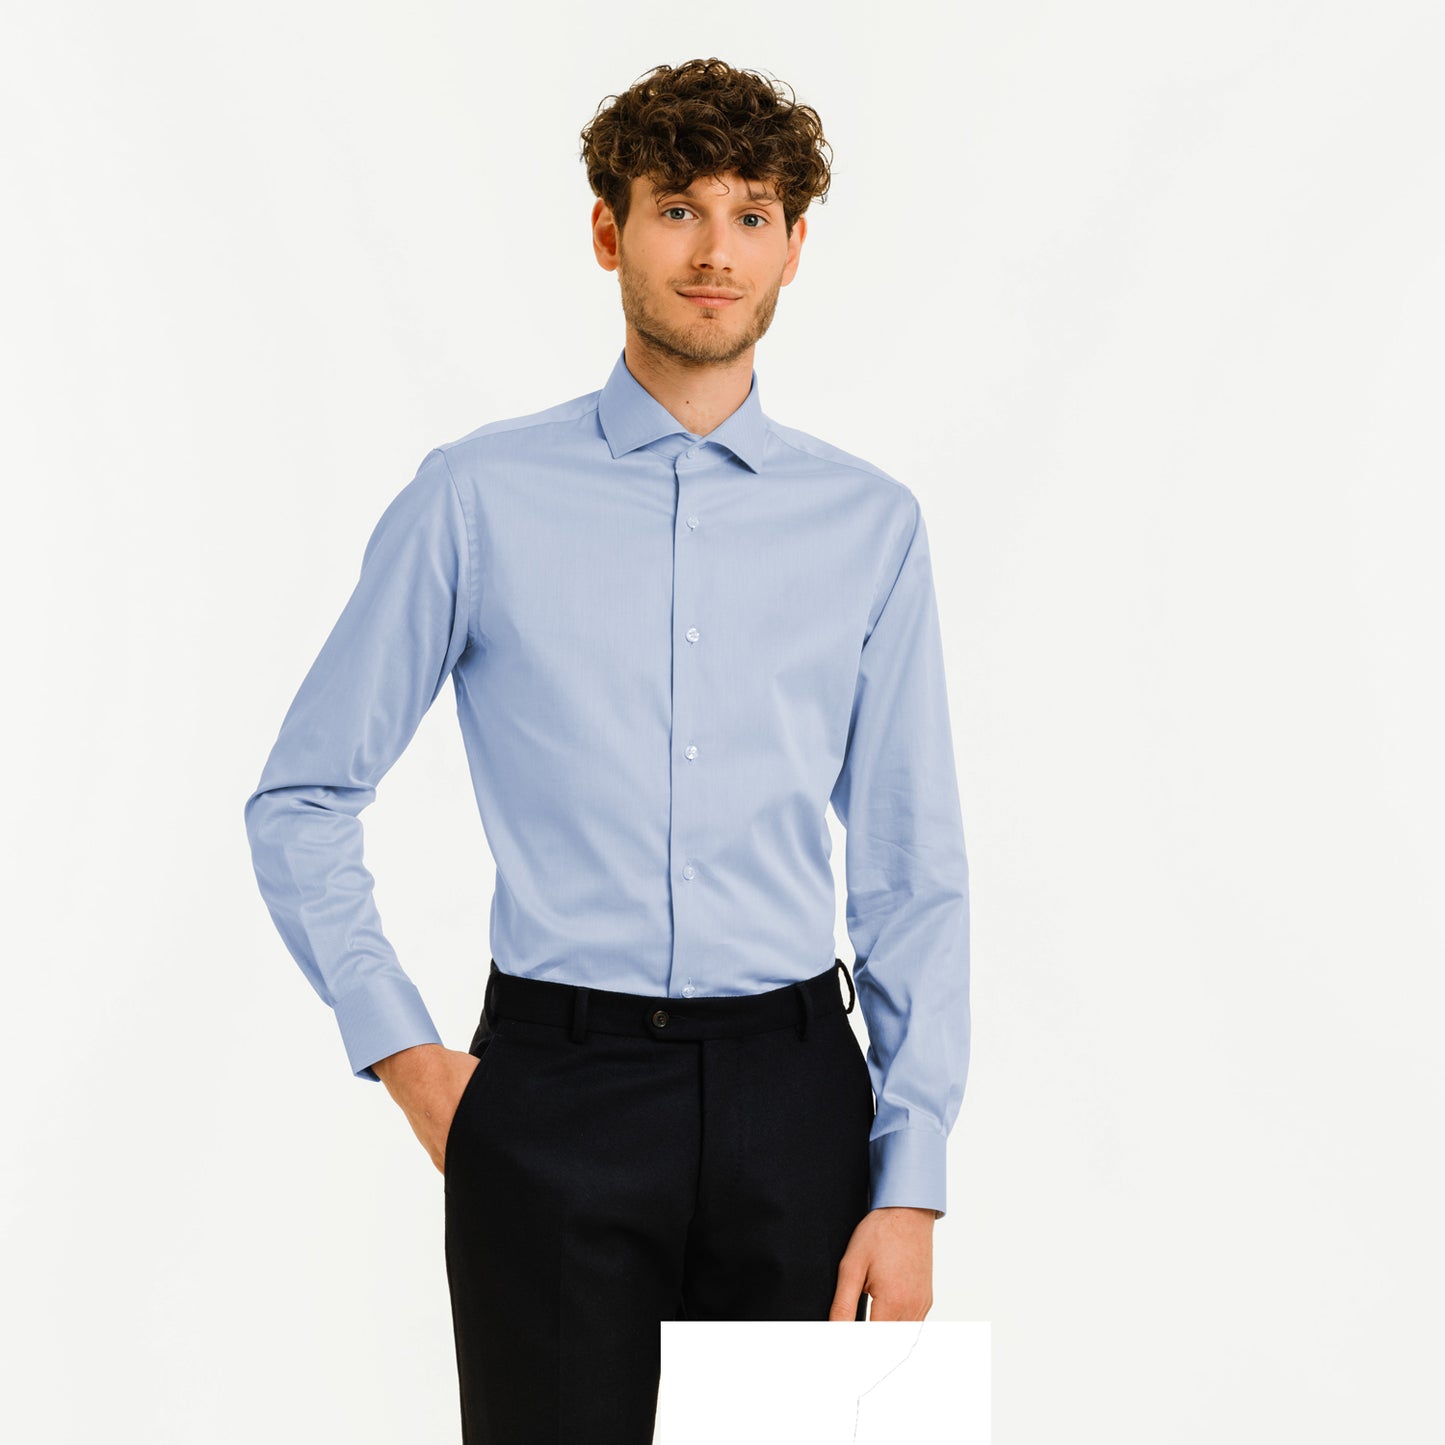 Blue double-twisted twill shirt